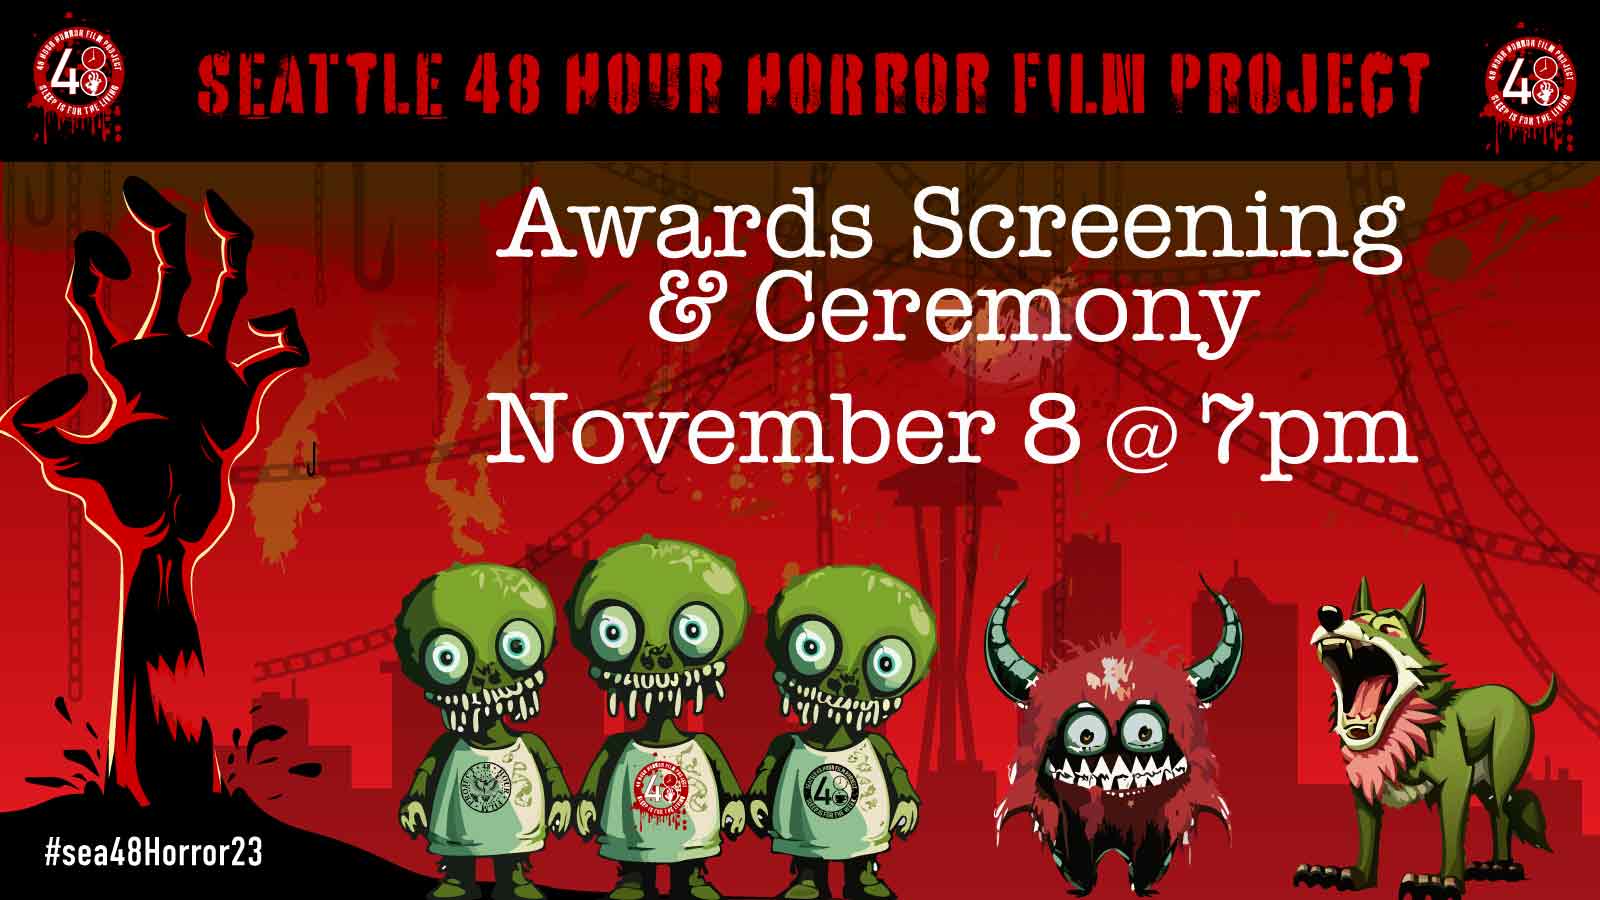 48 Hour Horror Film Project Awards